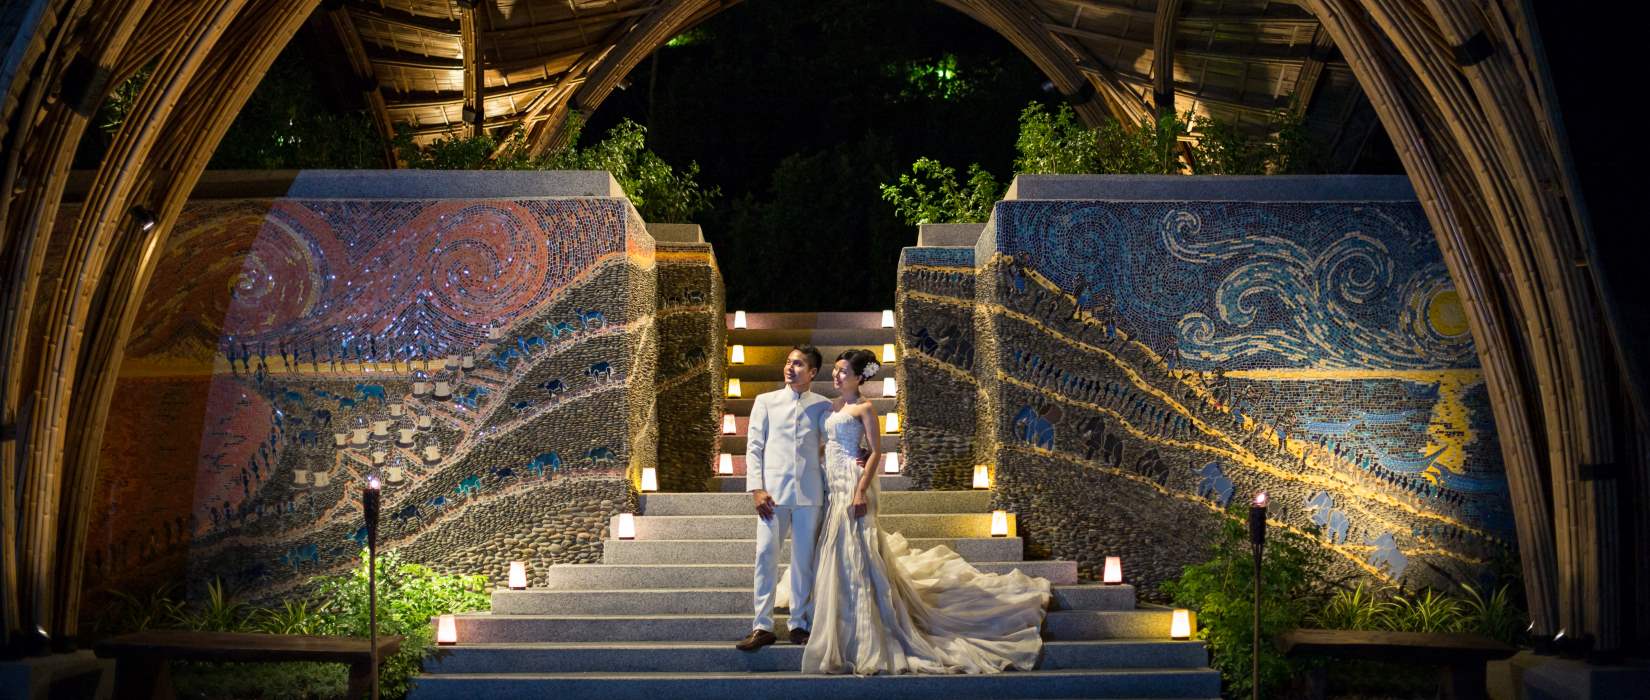 Top 5 resorts in Thailand for picture-perfect weddings